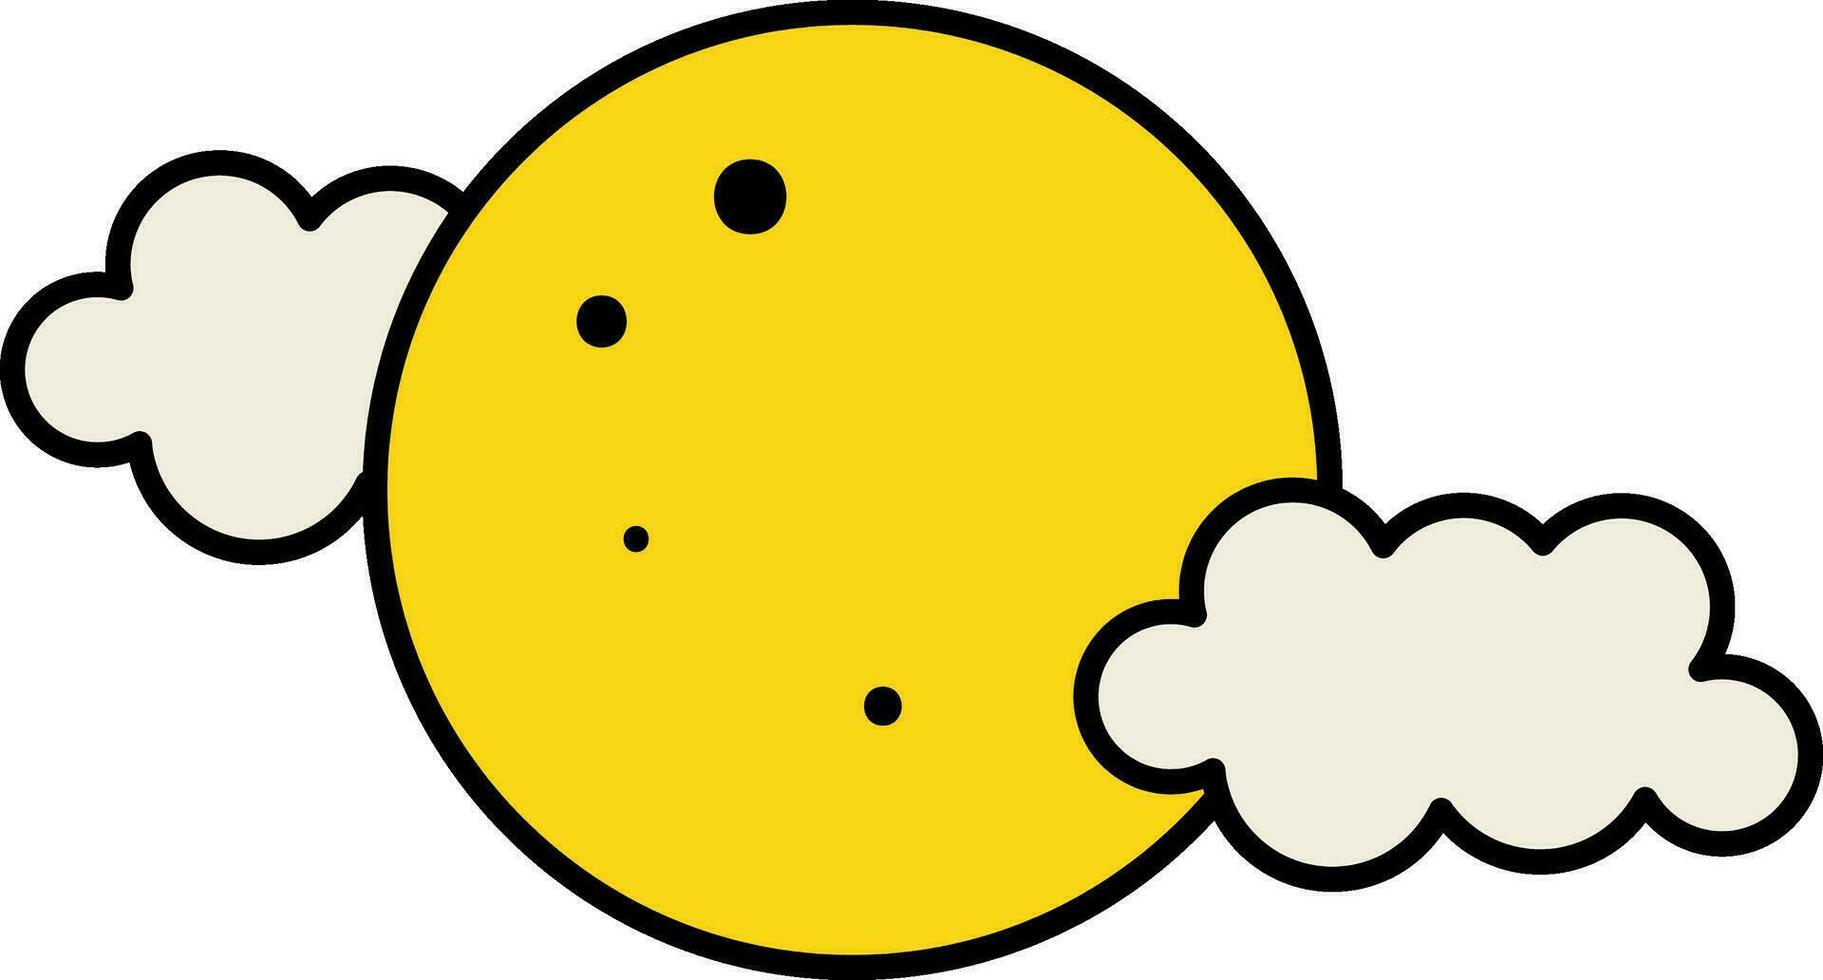 Yellow Full Moon With Clouds Icon In Flat Style. vector